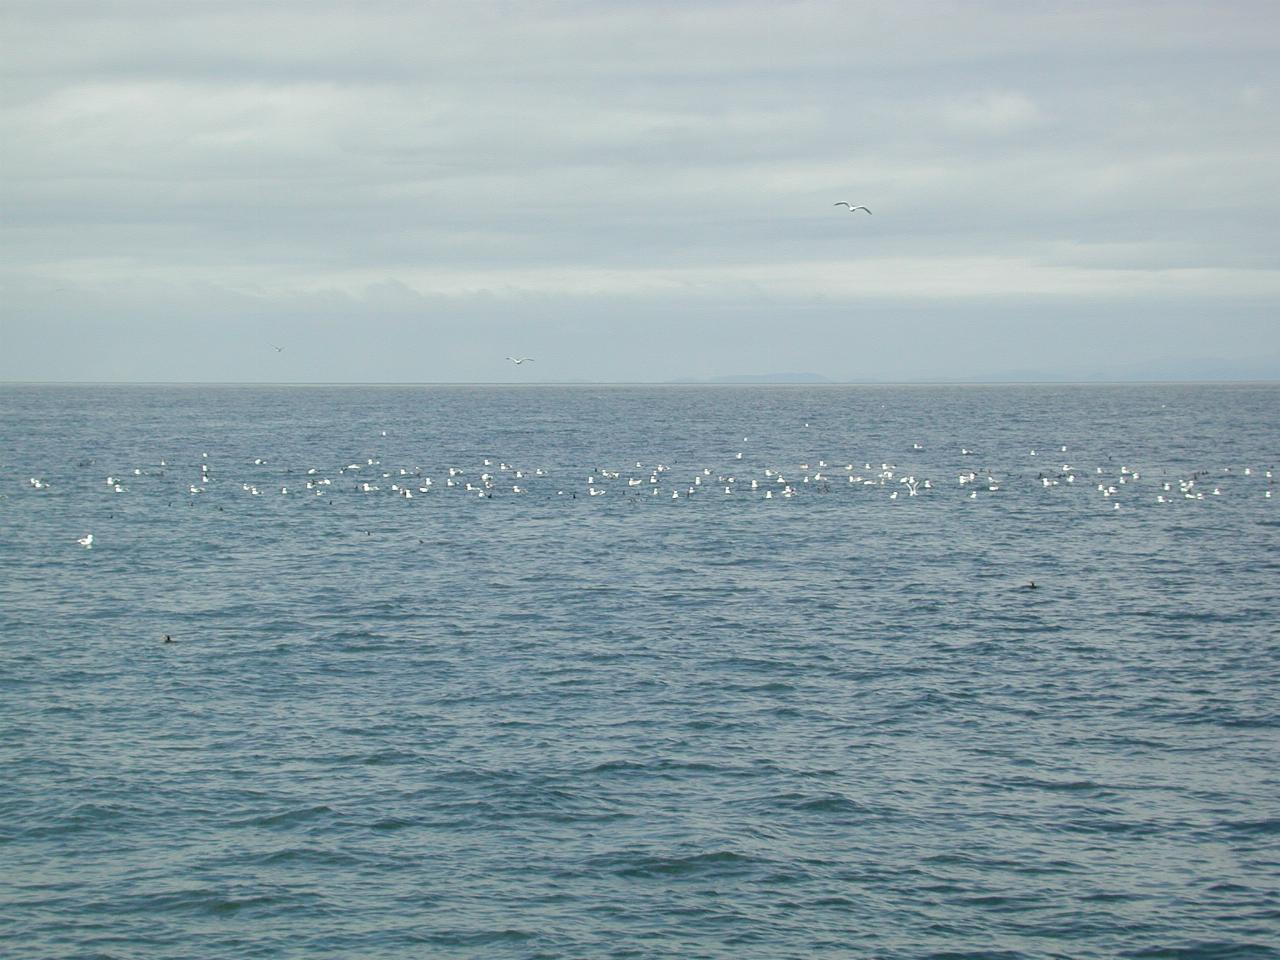 Seagulls at sea - perhaps a run of salmon are nearby